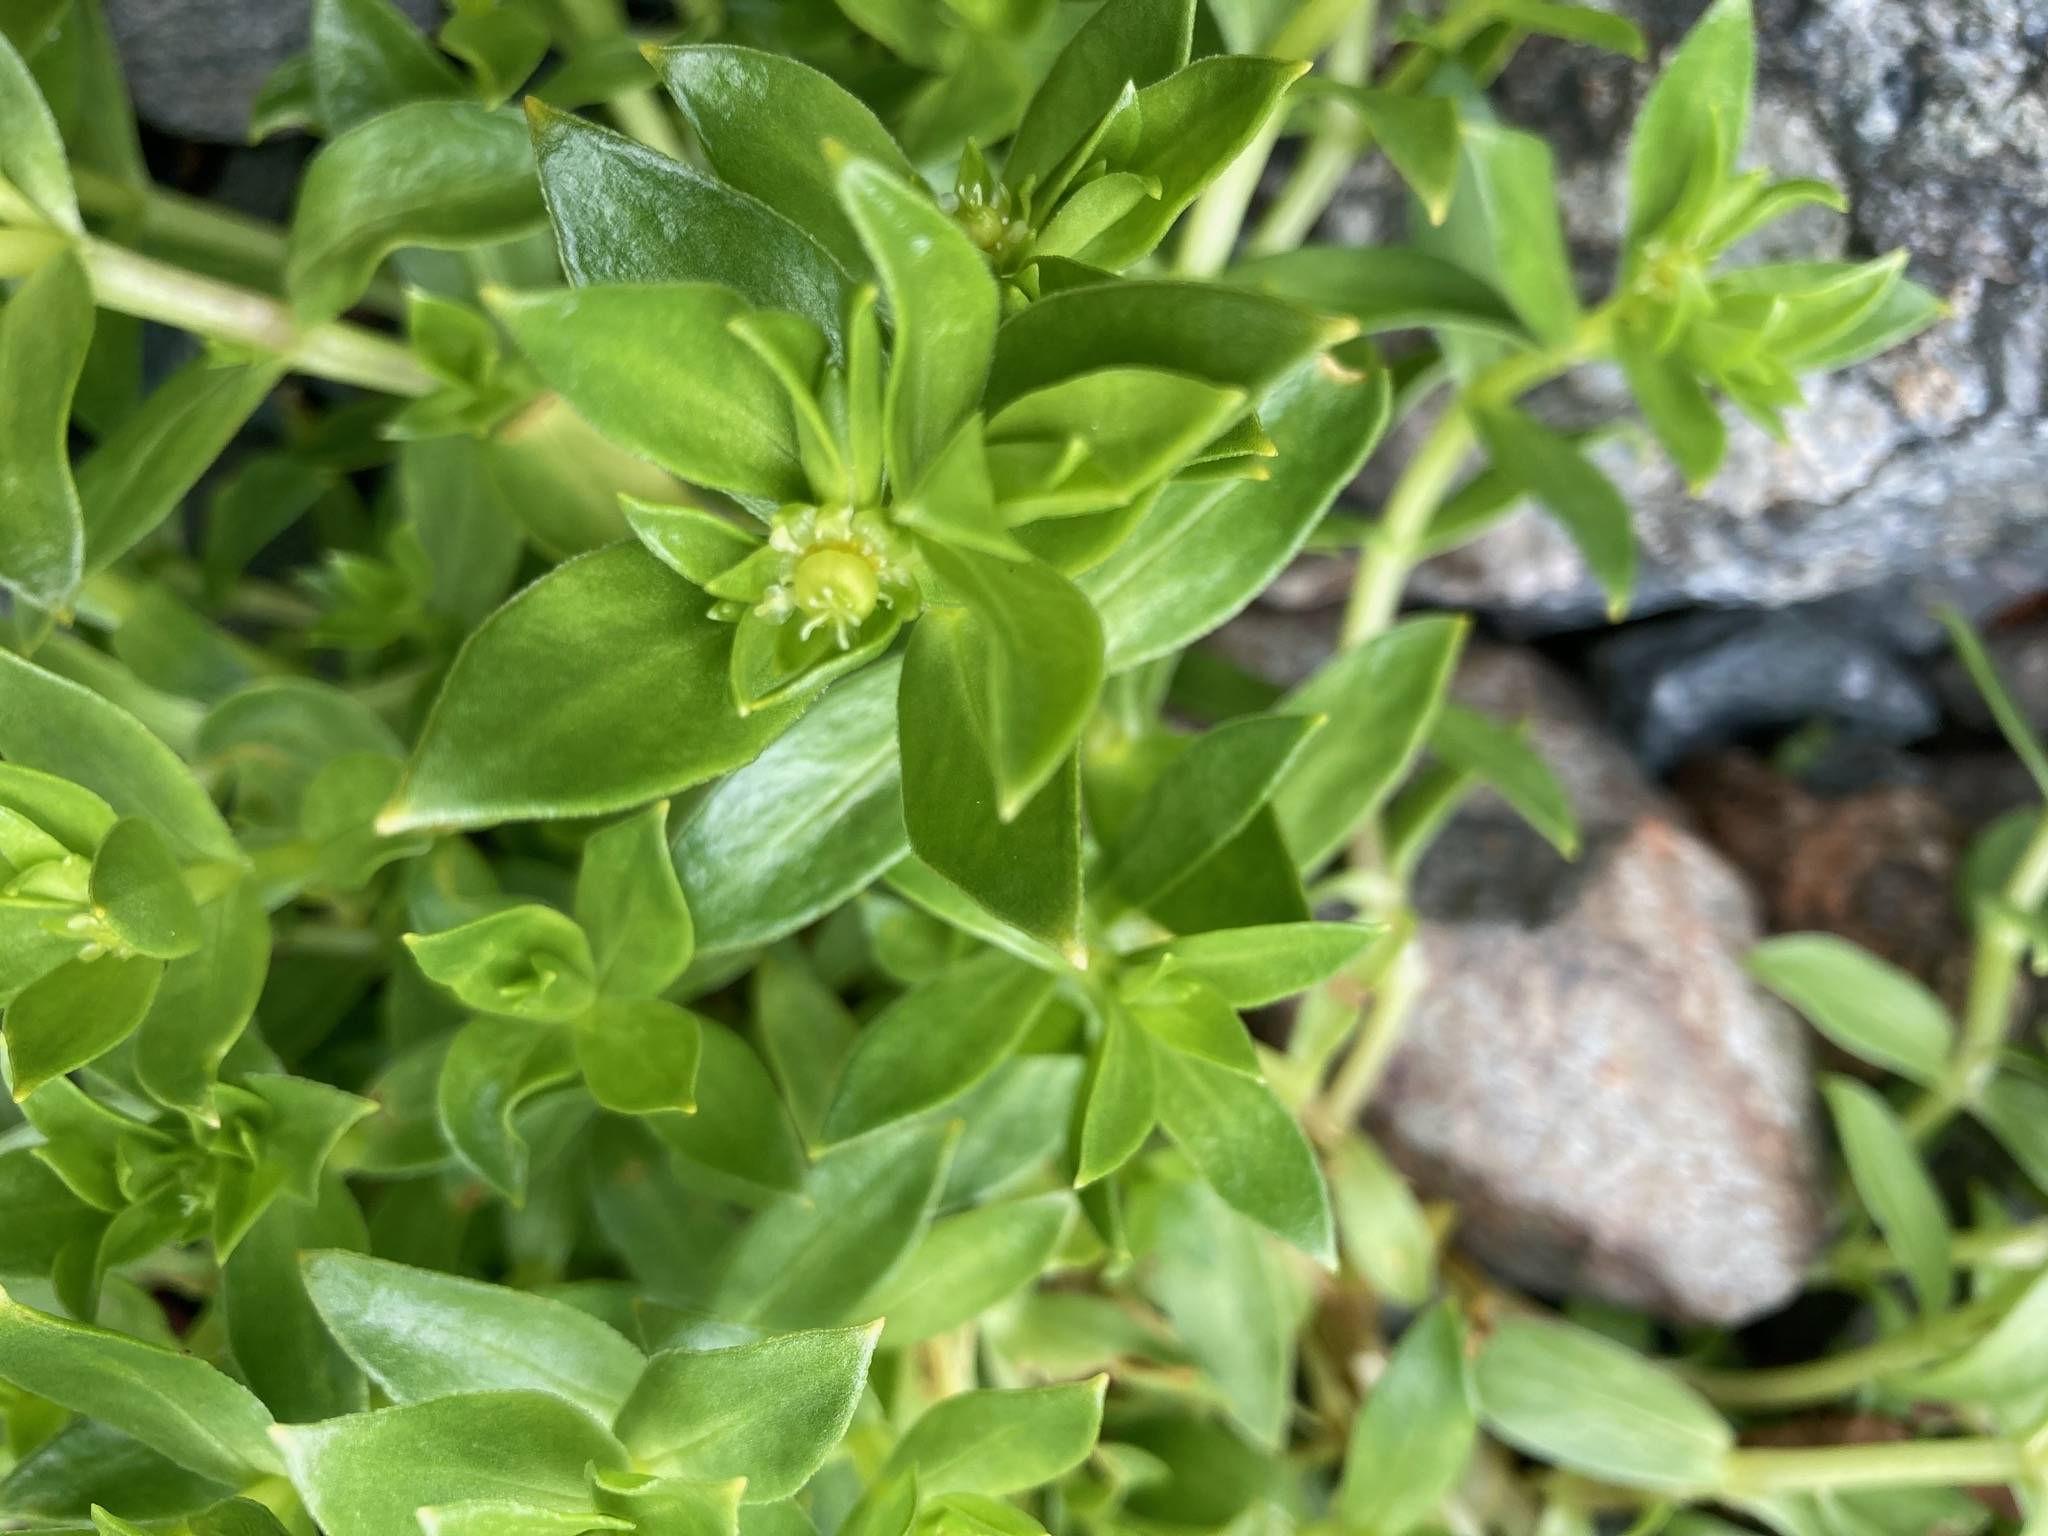 Female flowers of beach greens have tiny petals and no male parts. (No stamens are visible) (Courtesy Photo / Mary F. Willson)